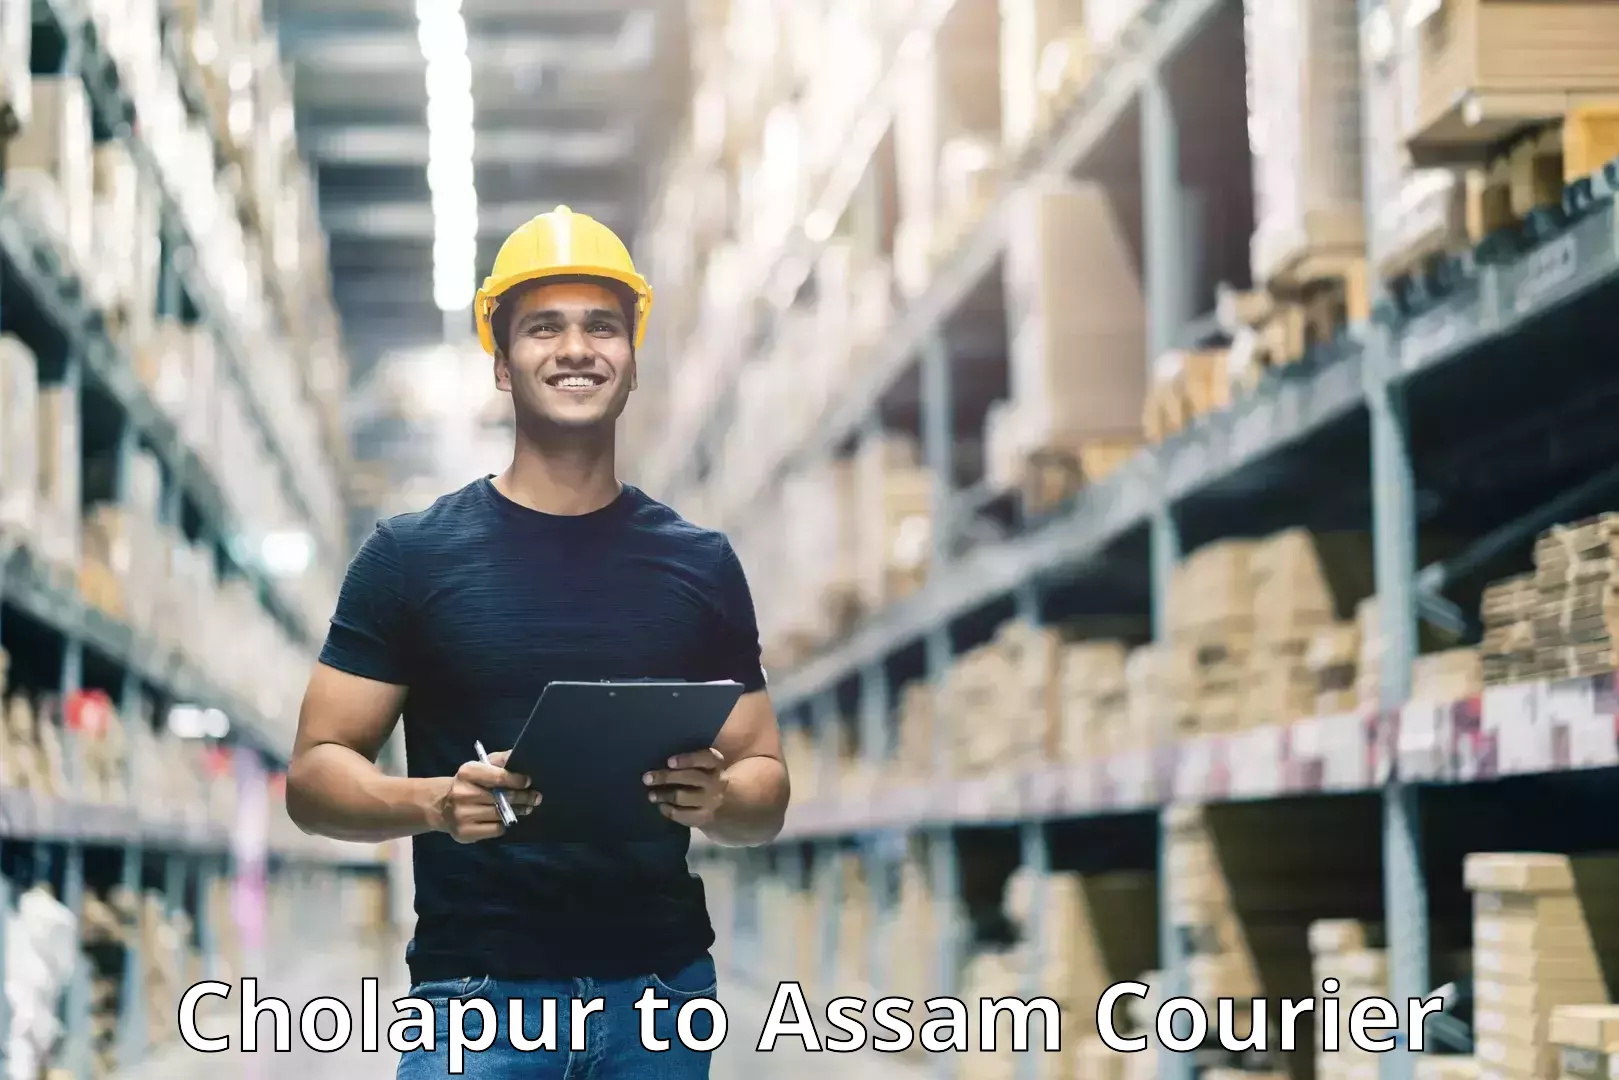 Tech-enabled shipping Cholapur to Lala Assam